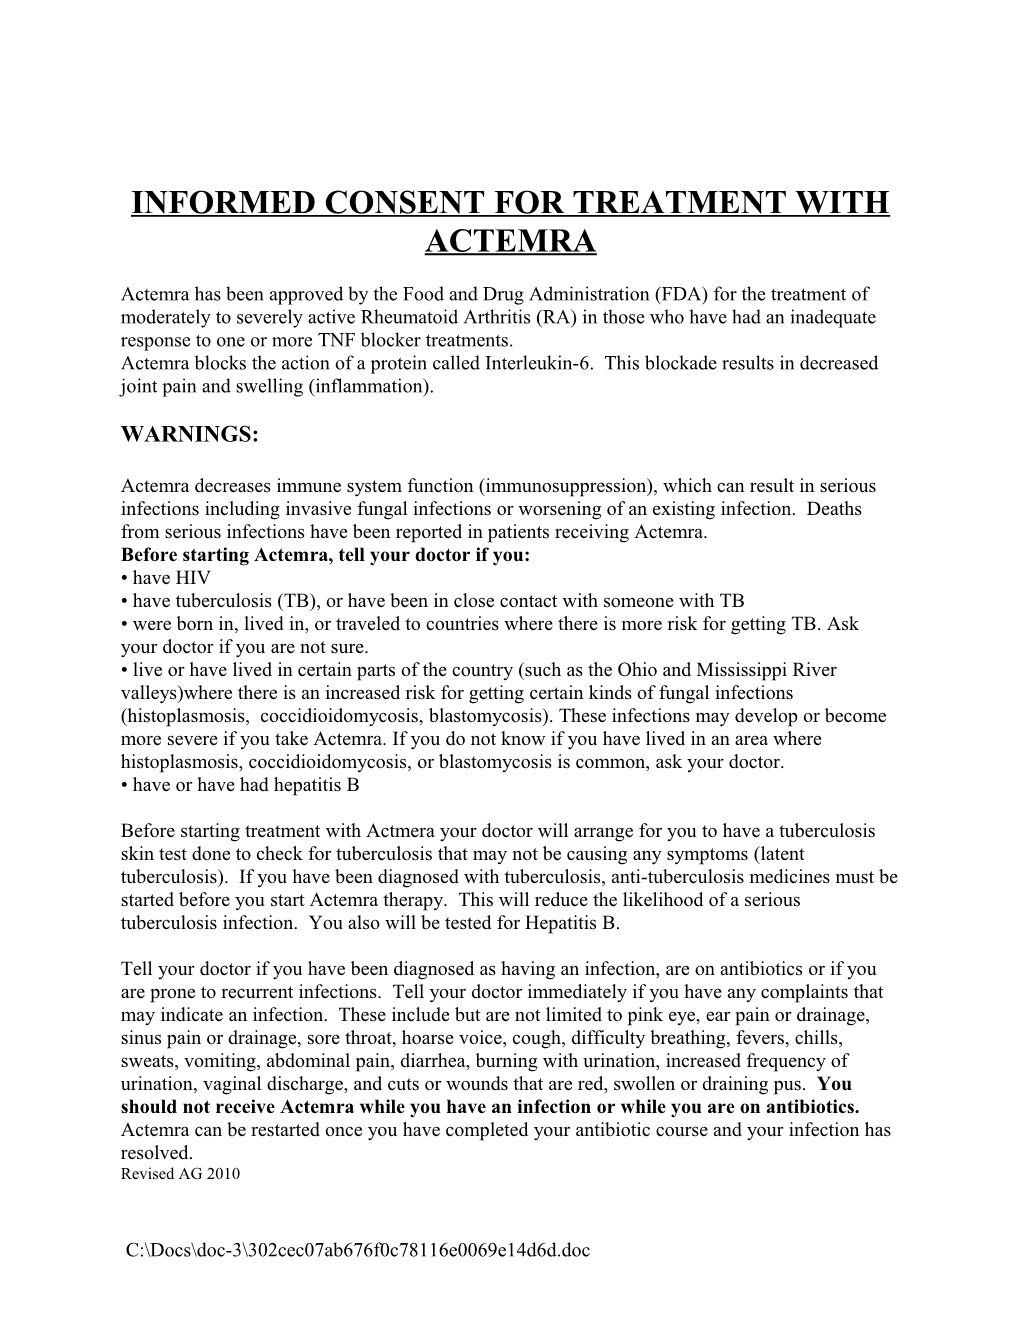 Informed Consent for Treatment with Cimxia